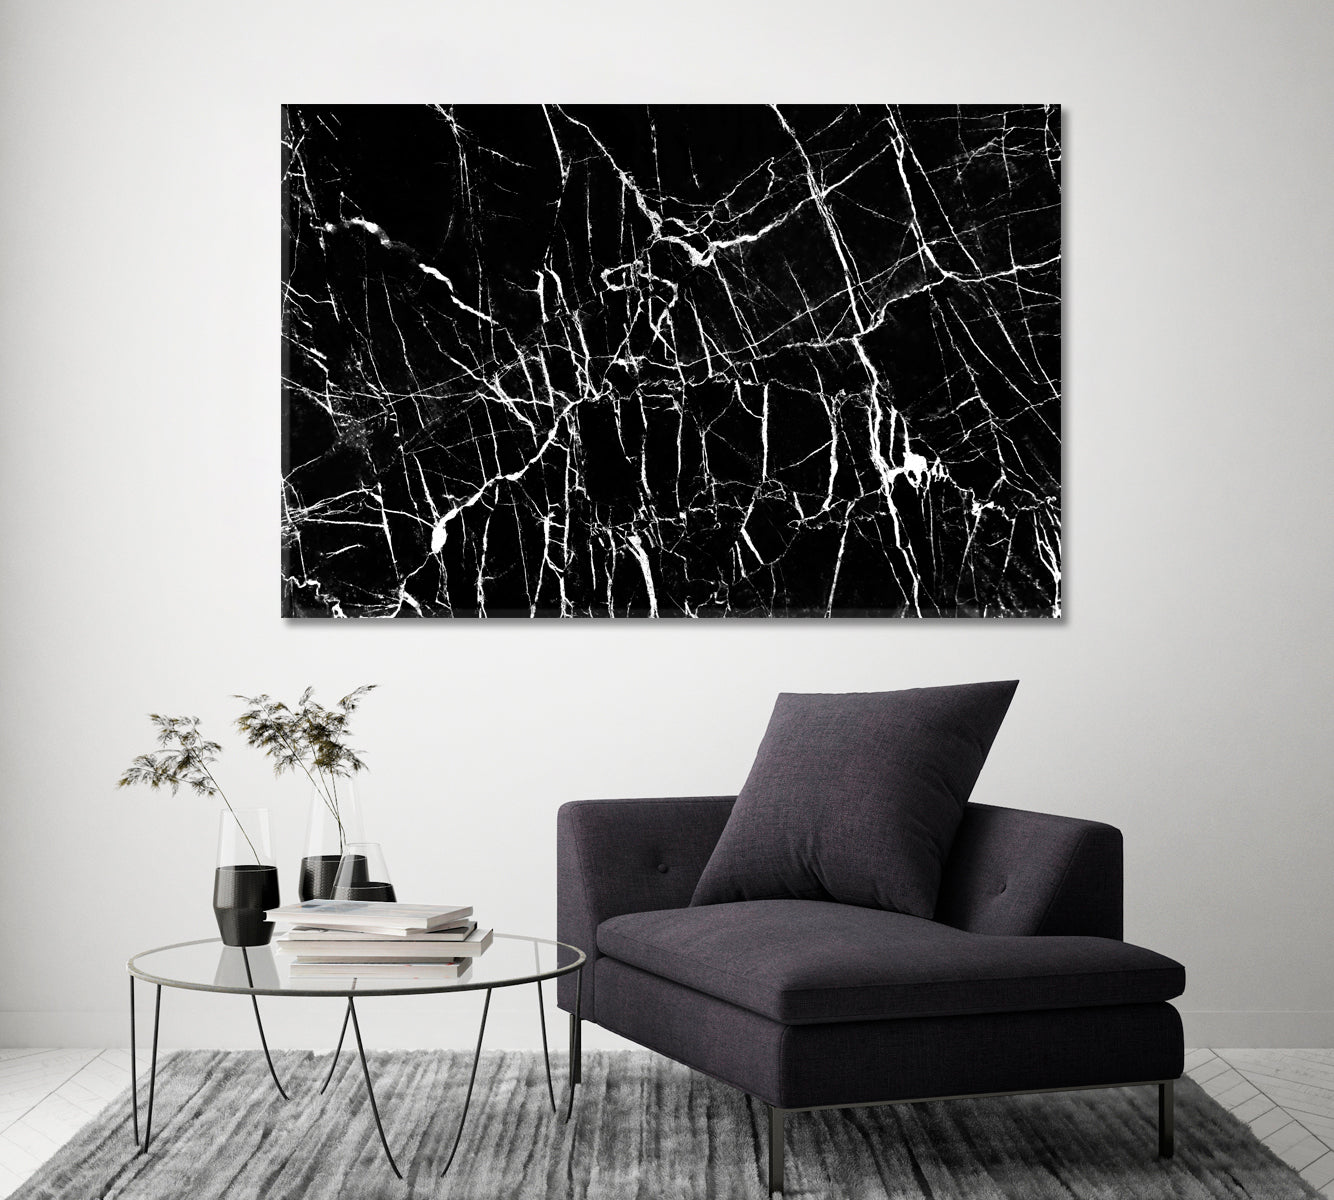 Black Marble Stone with Veins Canvas Print ArtLexy 1 Panel 24"x16" inches 